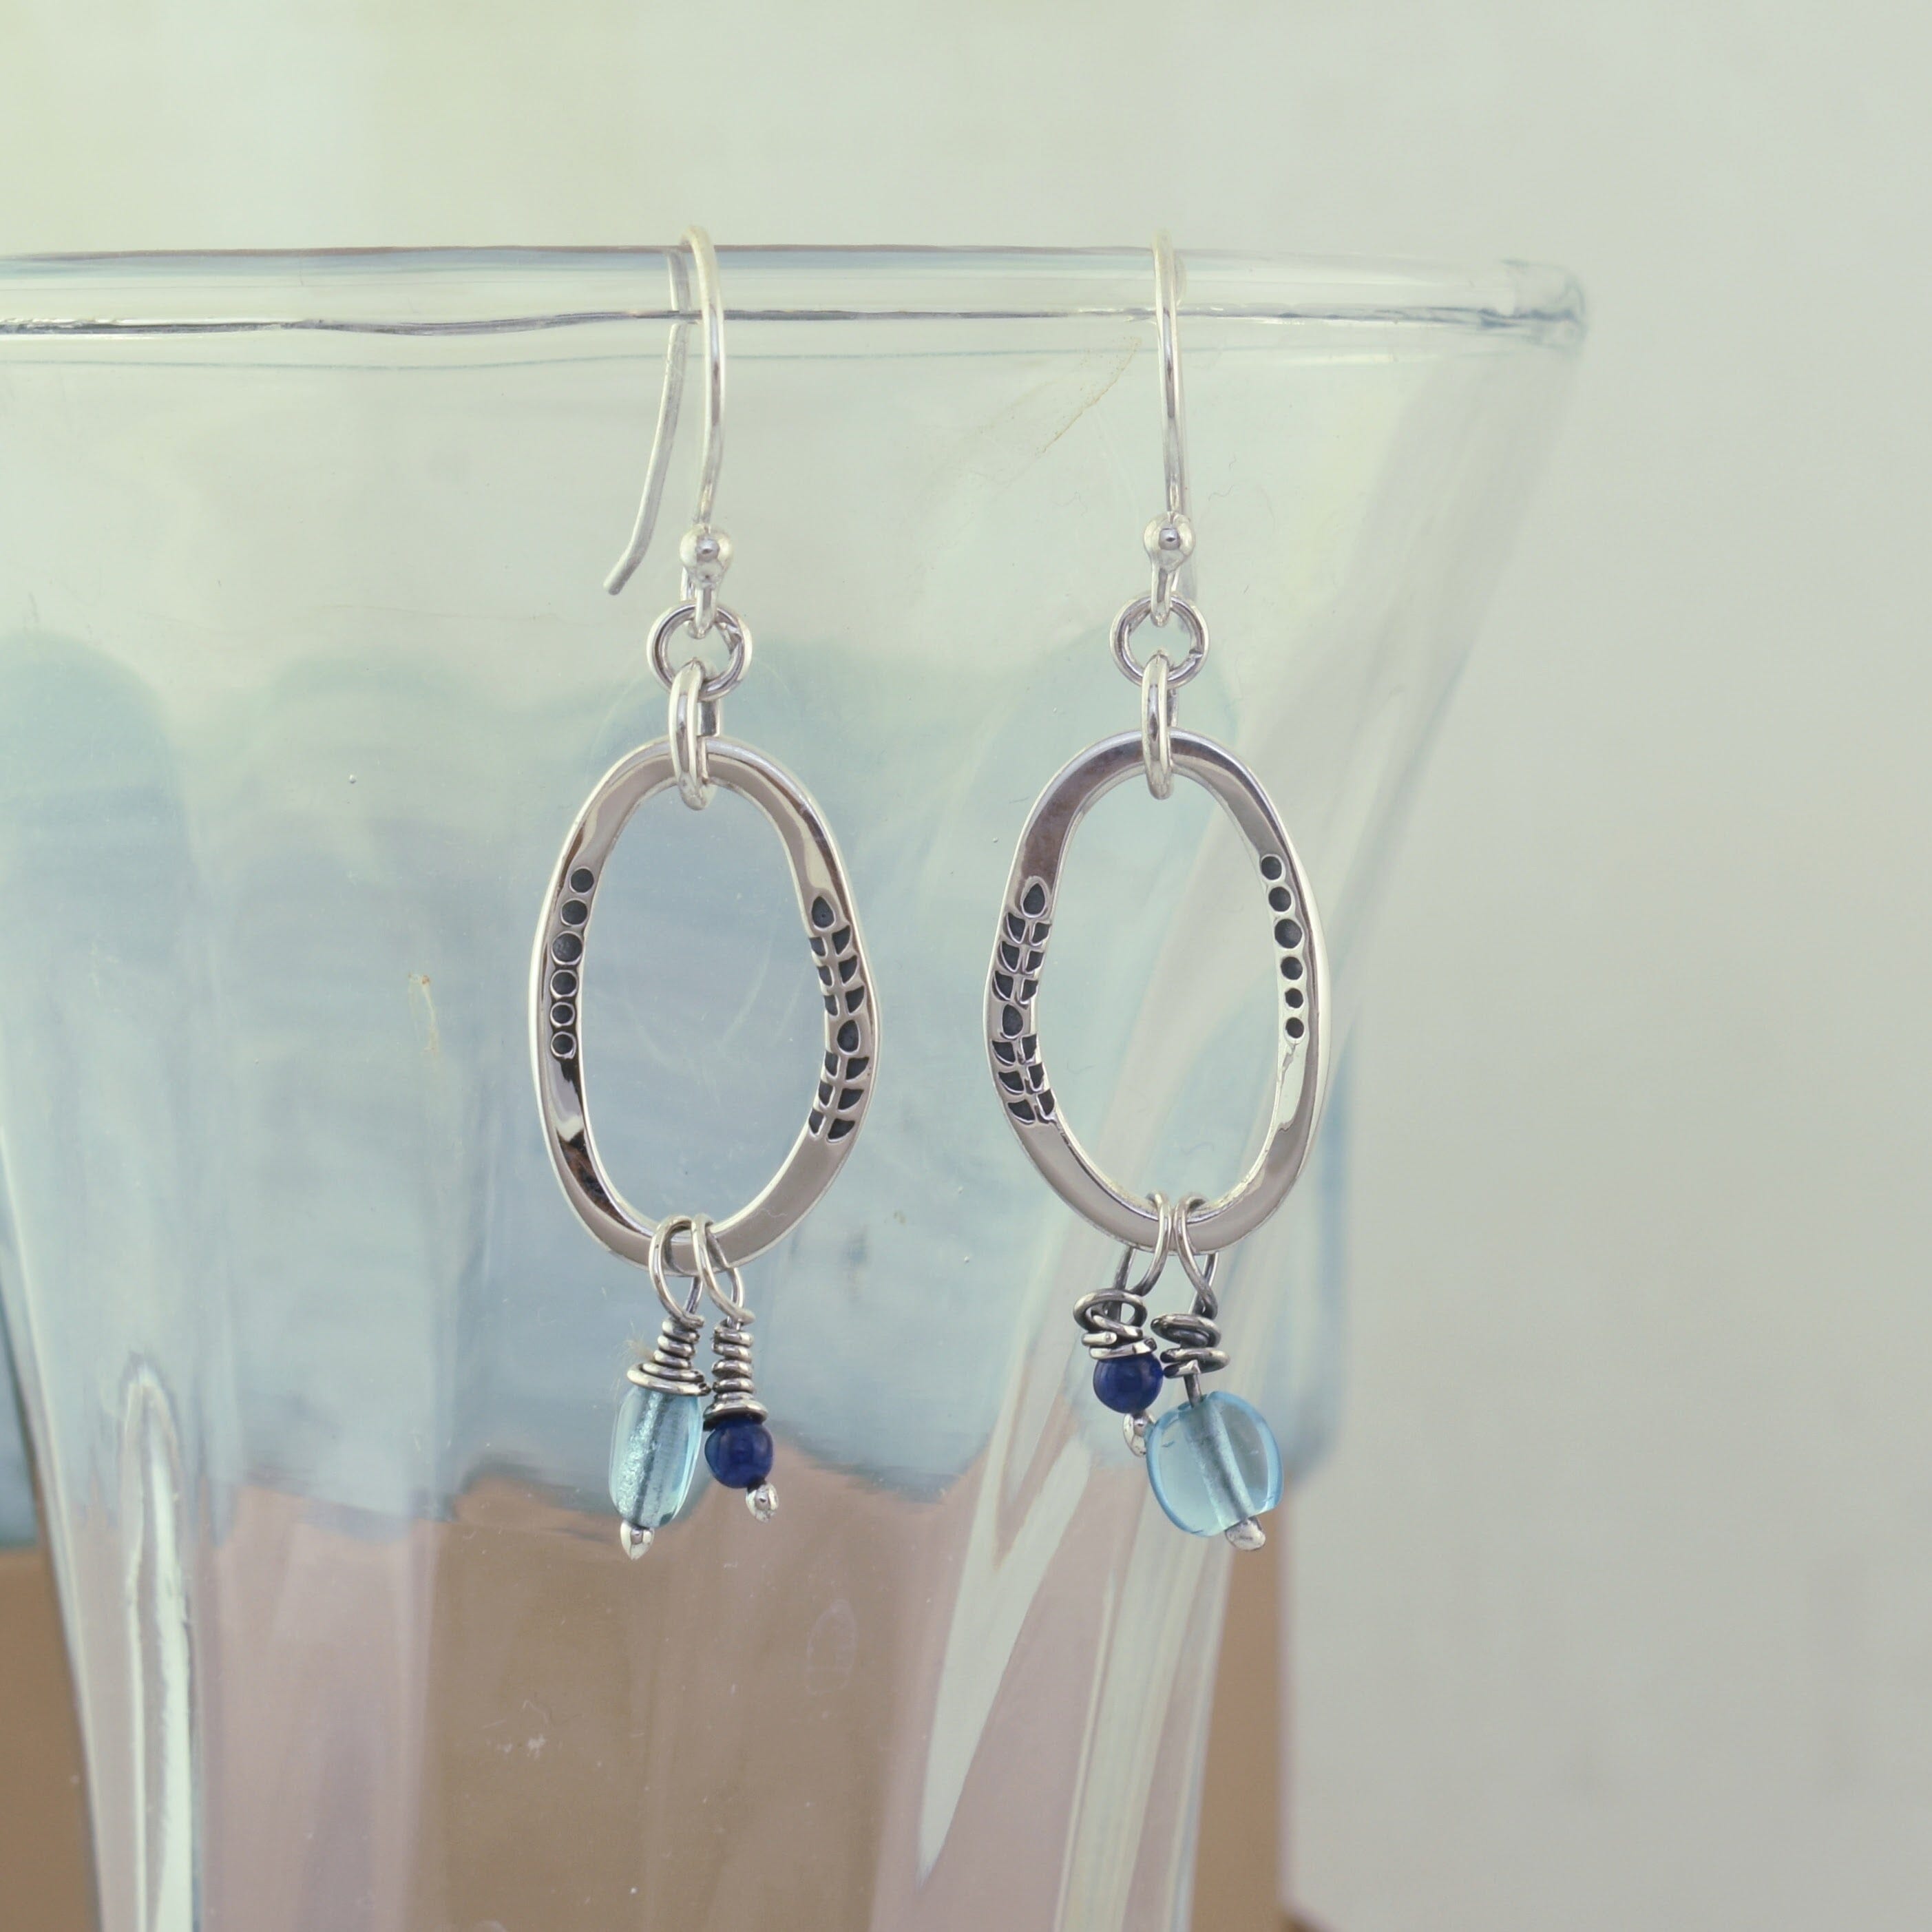 Sterling silver earrings with jade and glass dangling beads